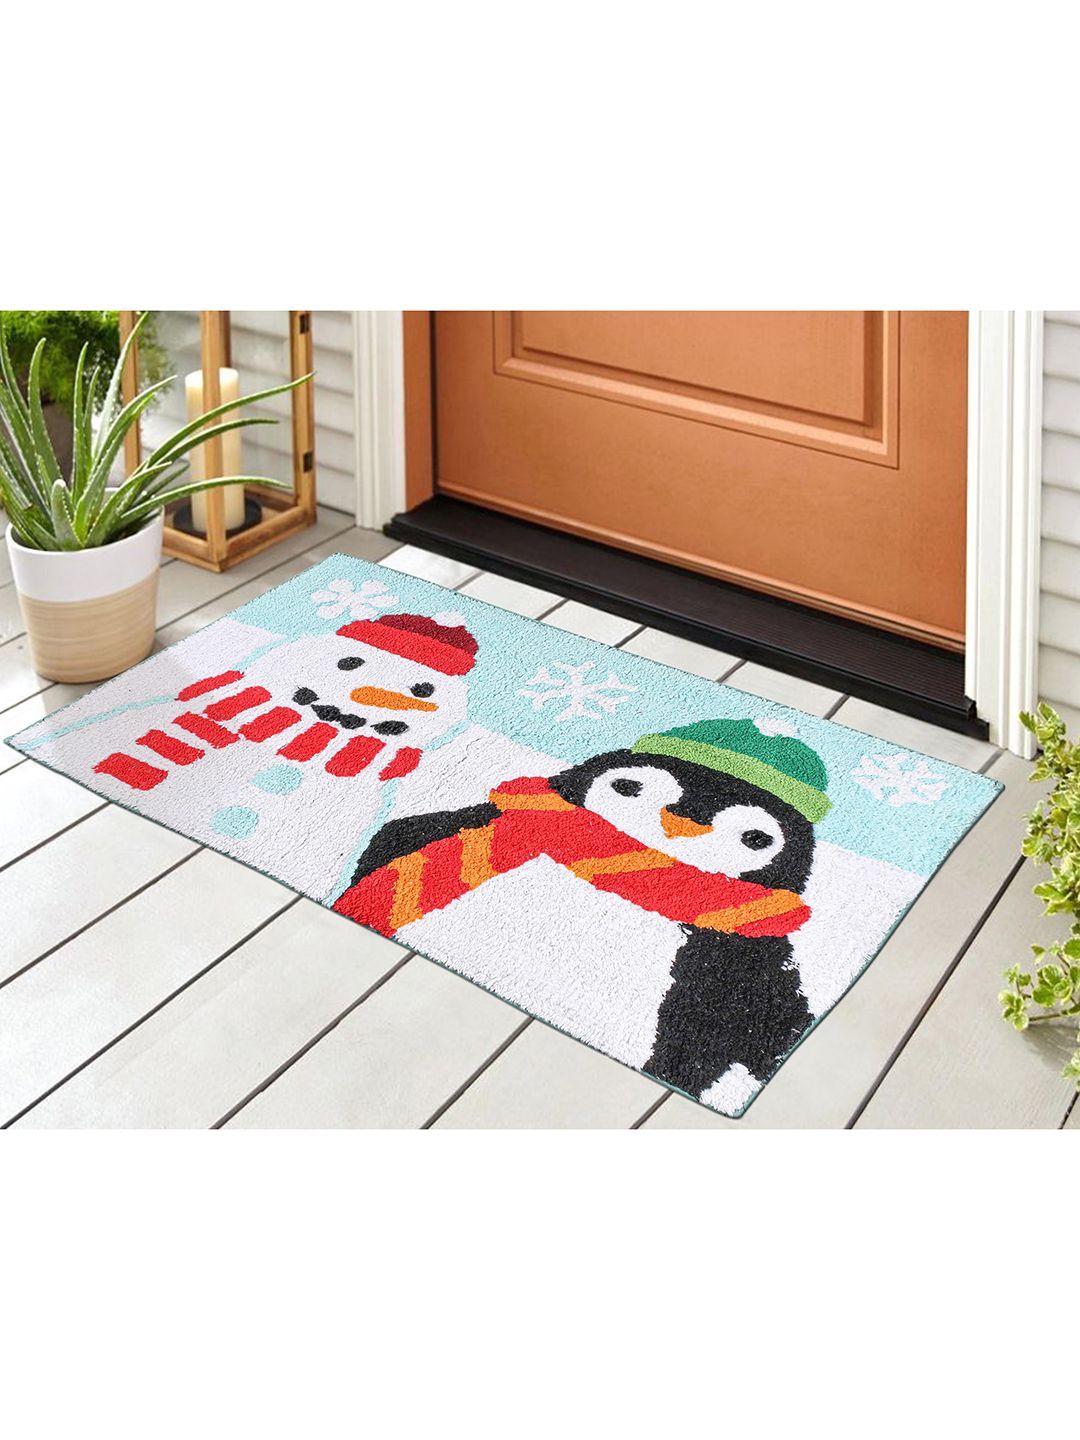 SHADES of LIFE Multi-Colored Printed Doormat Price in India